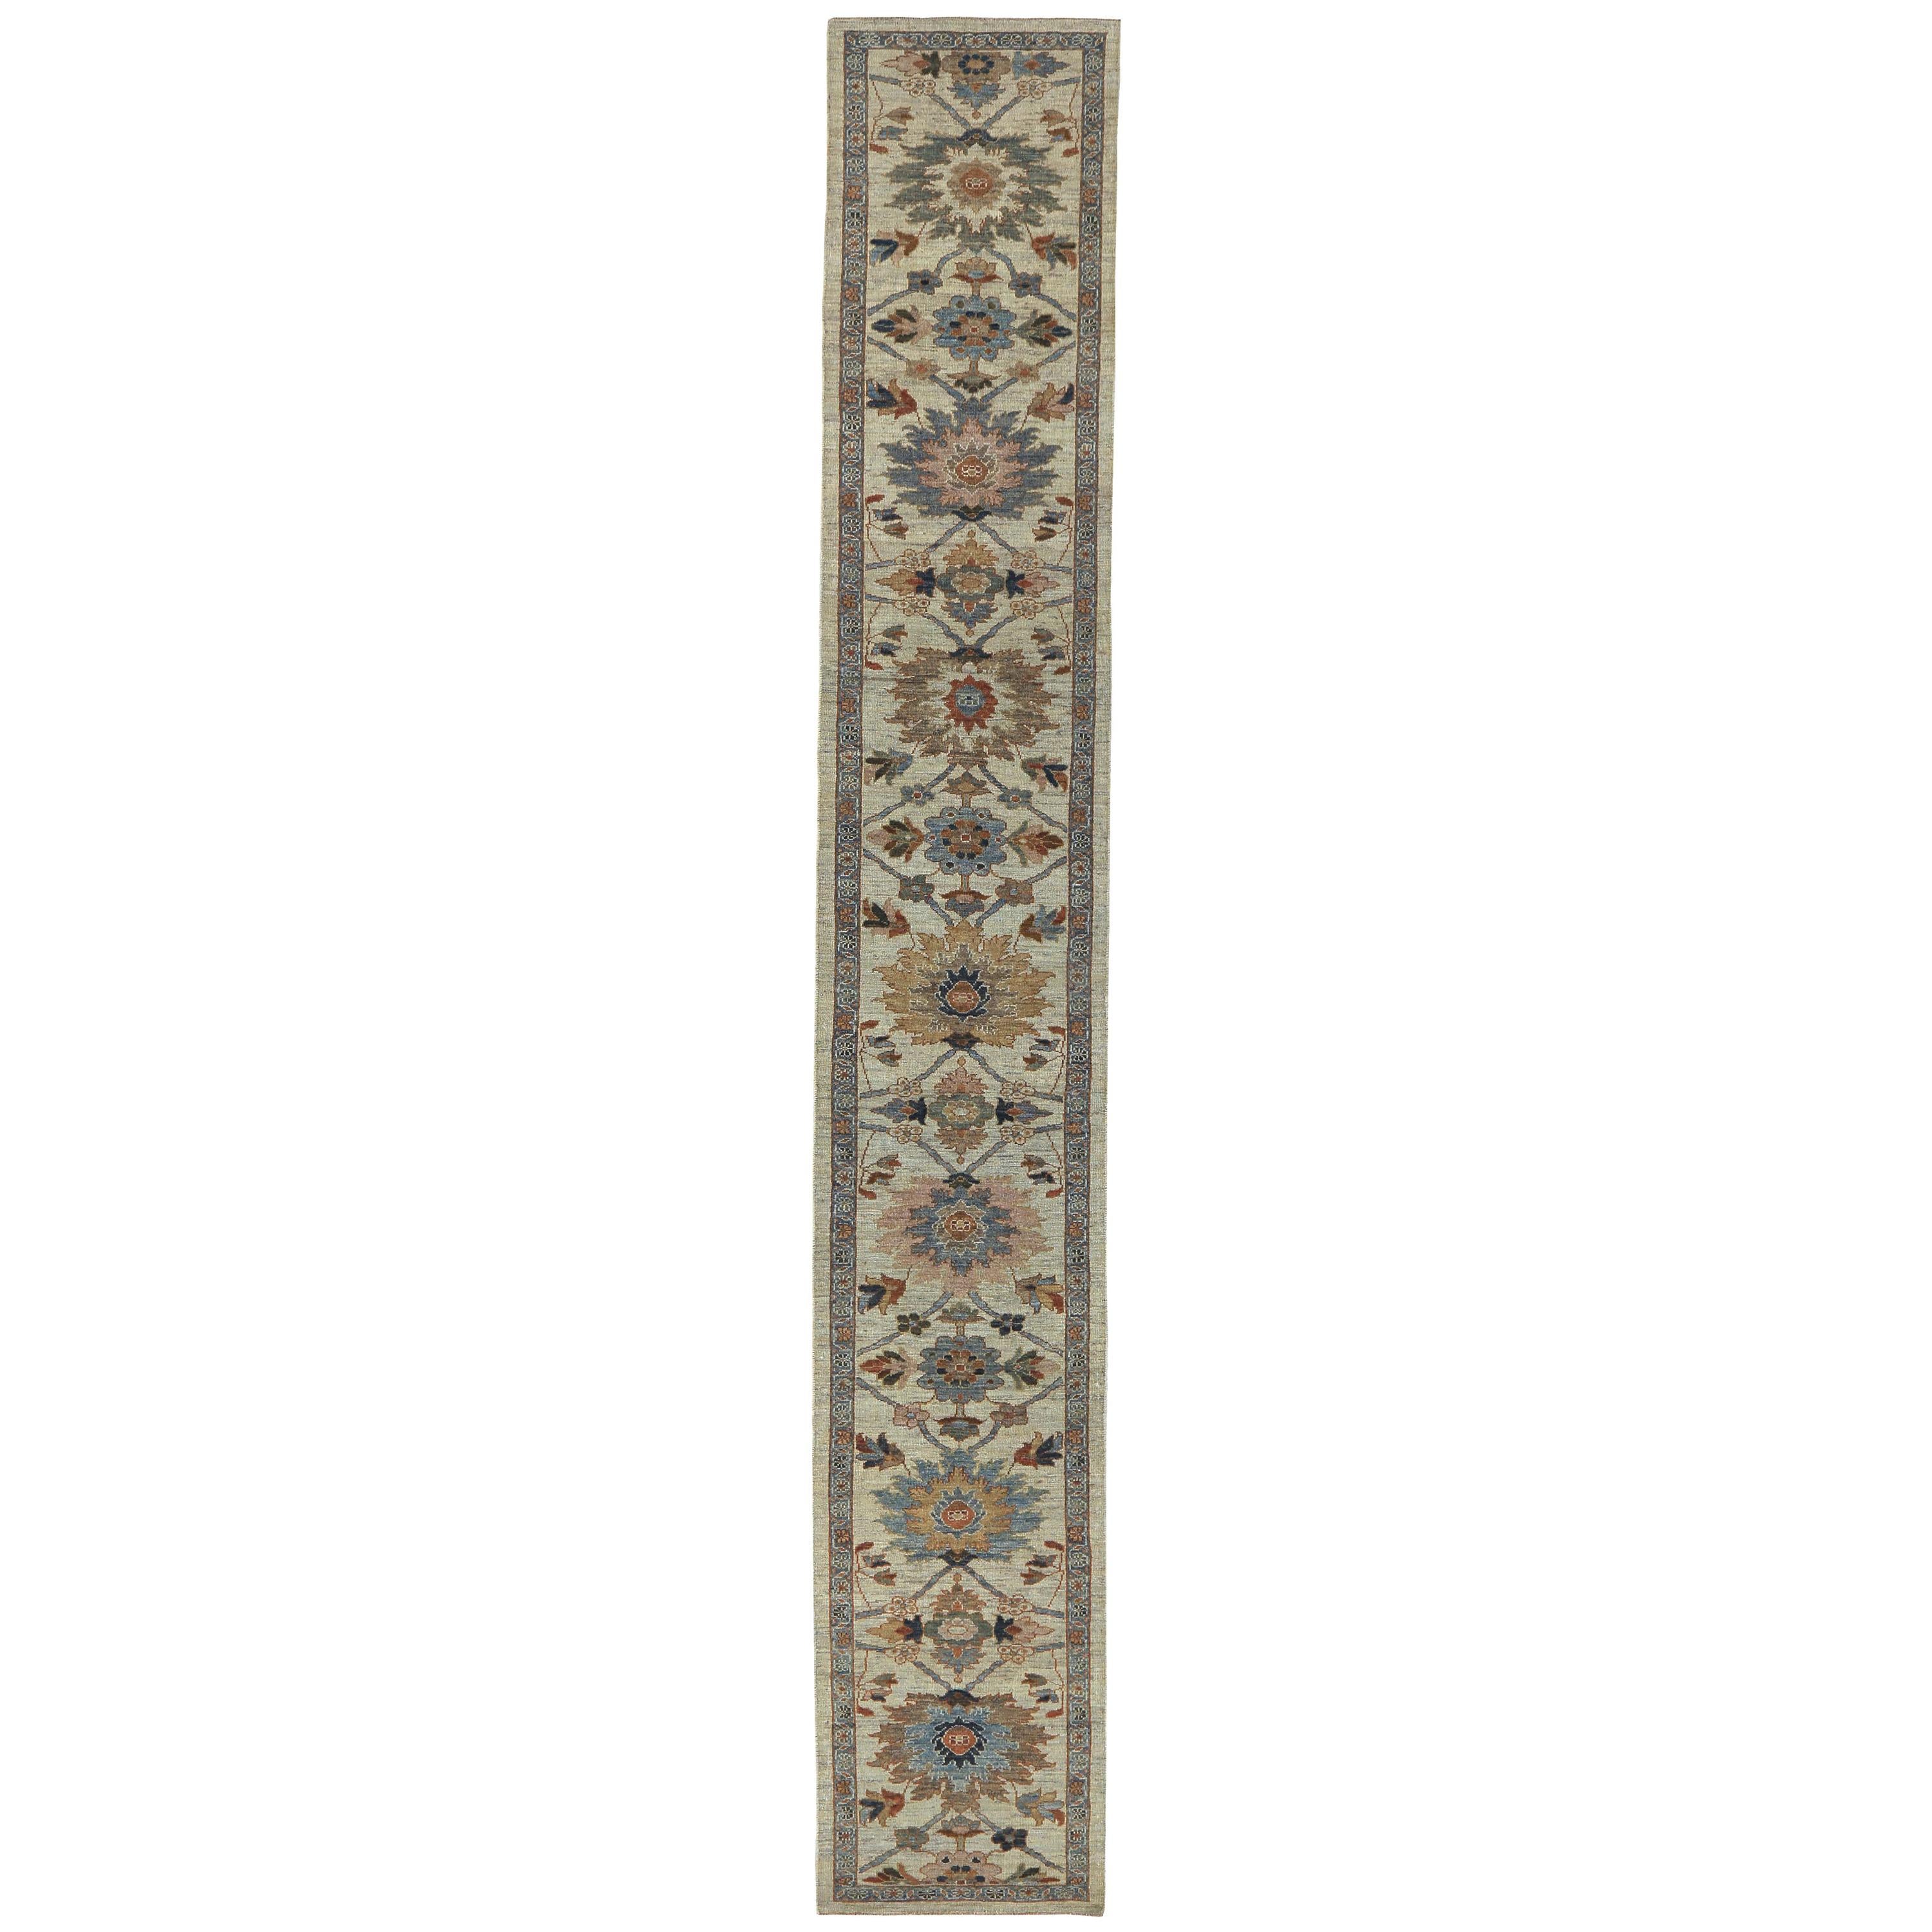 New Turkish Runner Rug Sultanabad Design with Brown and Beige Botanical Details